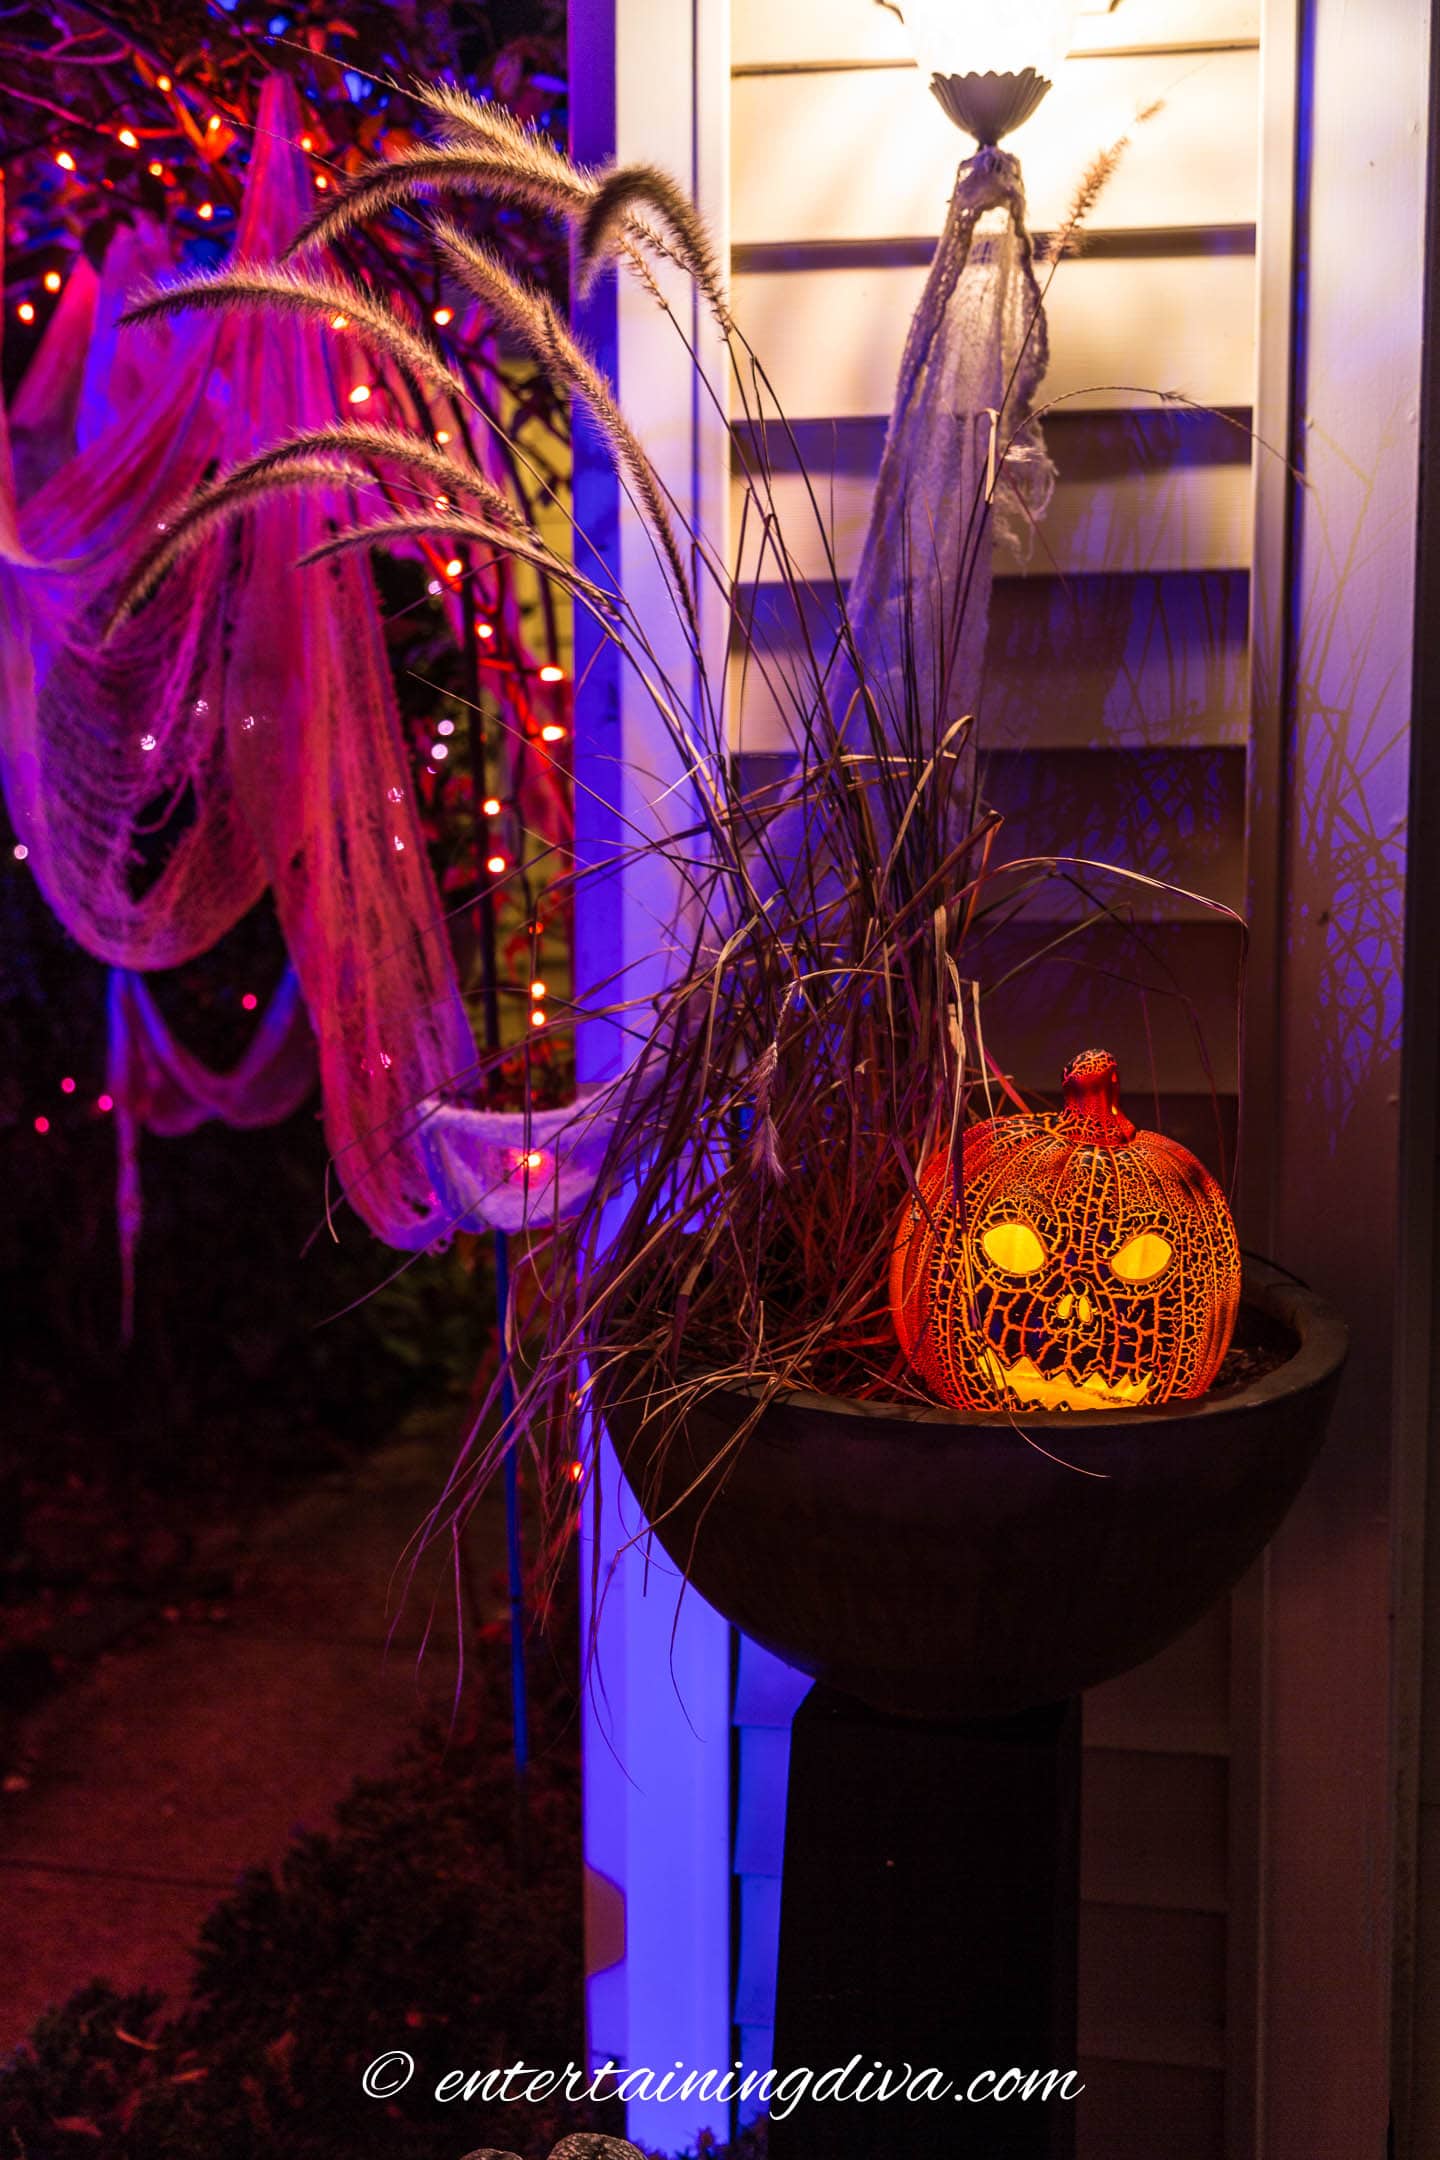 A planter with a Halloween jack o lantern for outdoor lighting.